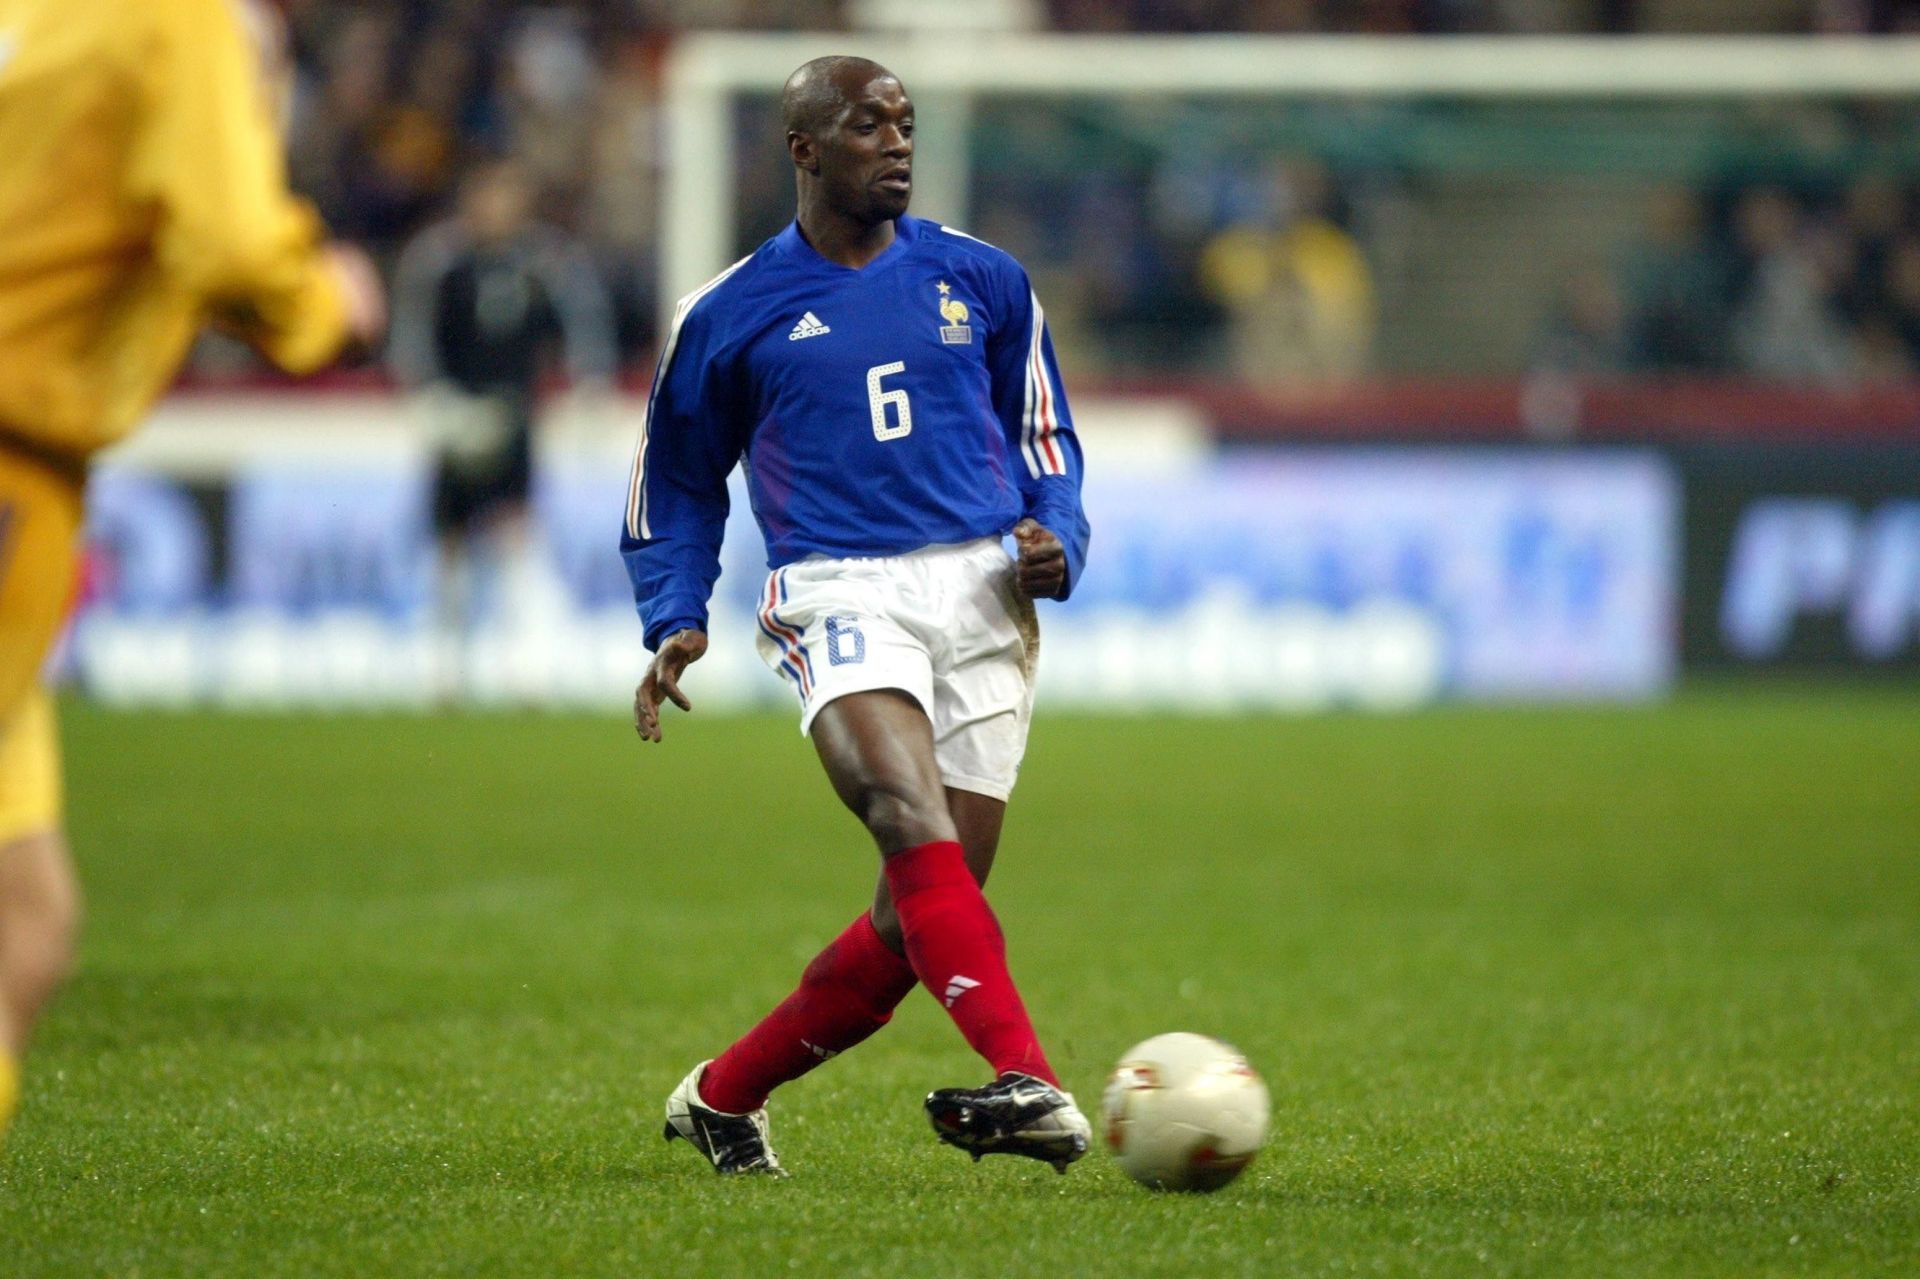 Claude Makelele came close to winning an international trophy with France in 2006 World Cup